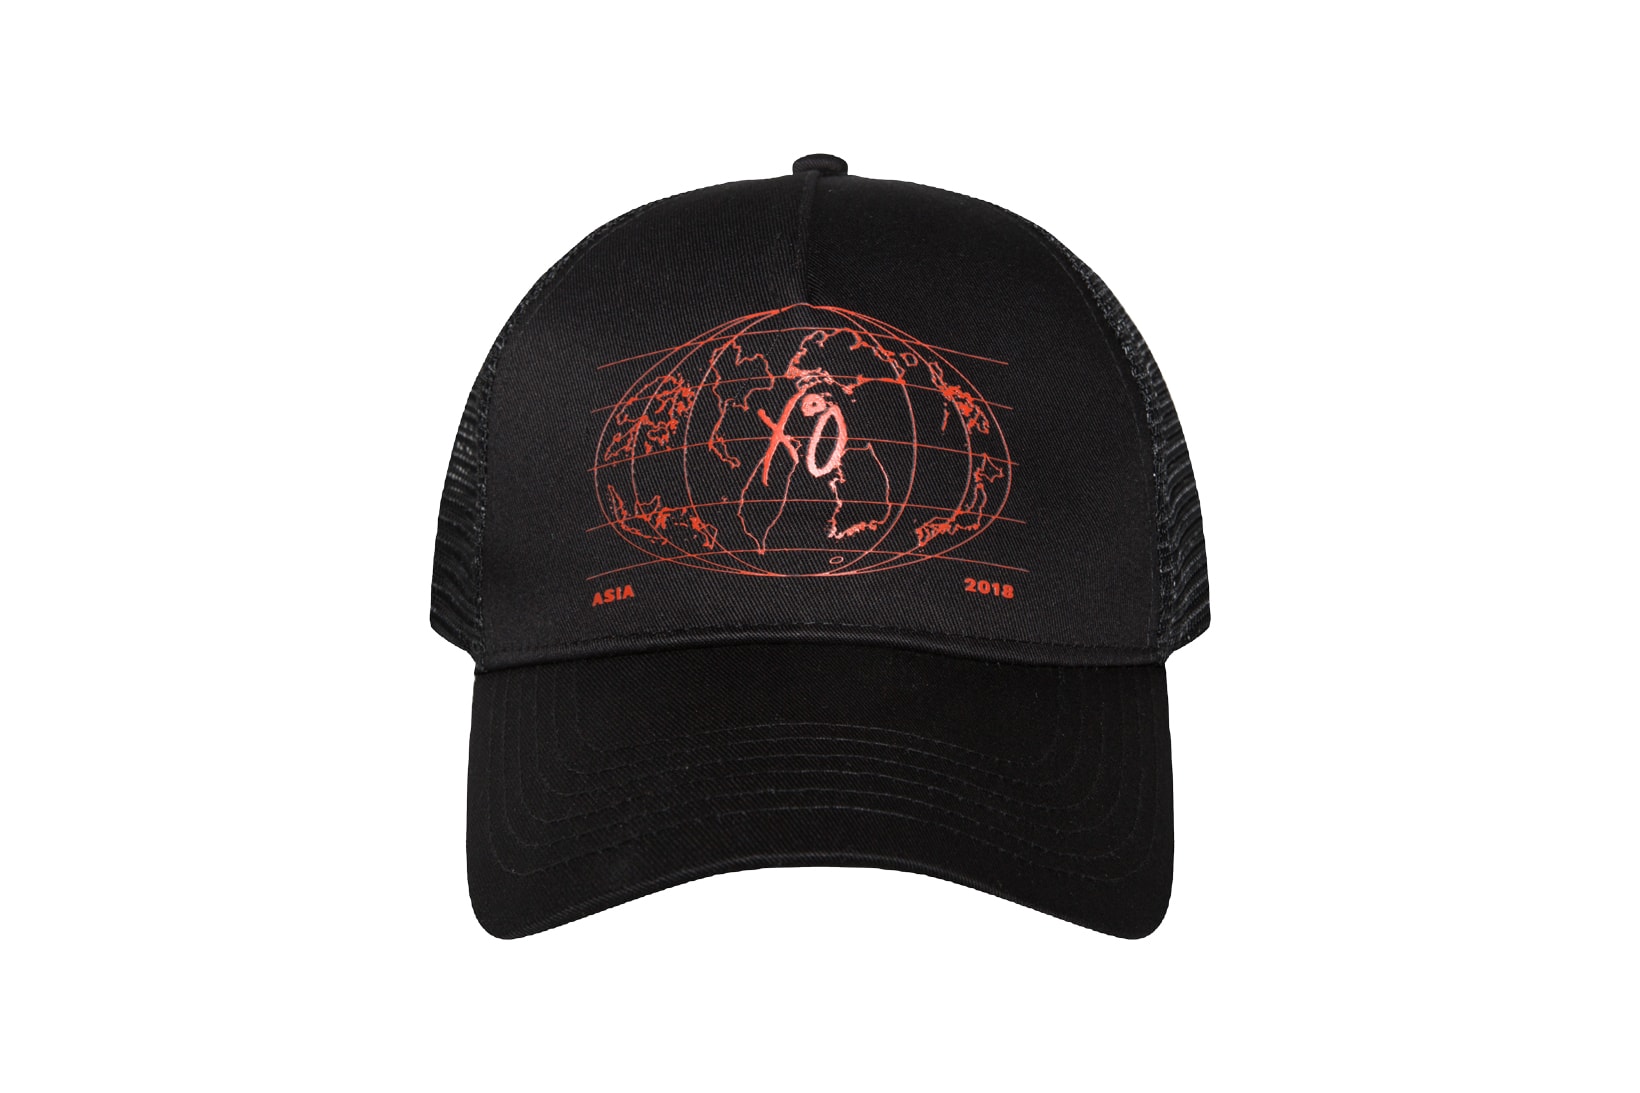 The Weeknd Asia Tour Merch Collection Cap Black